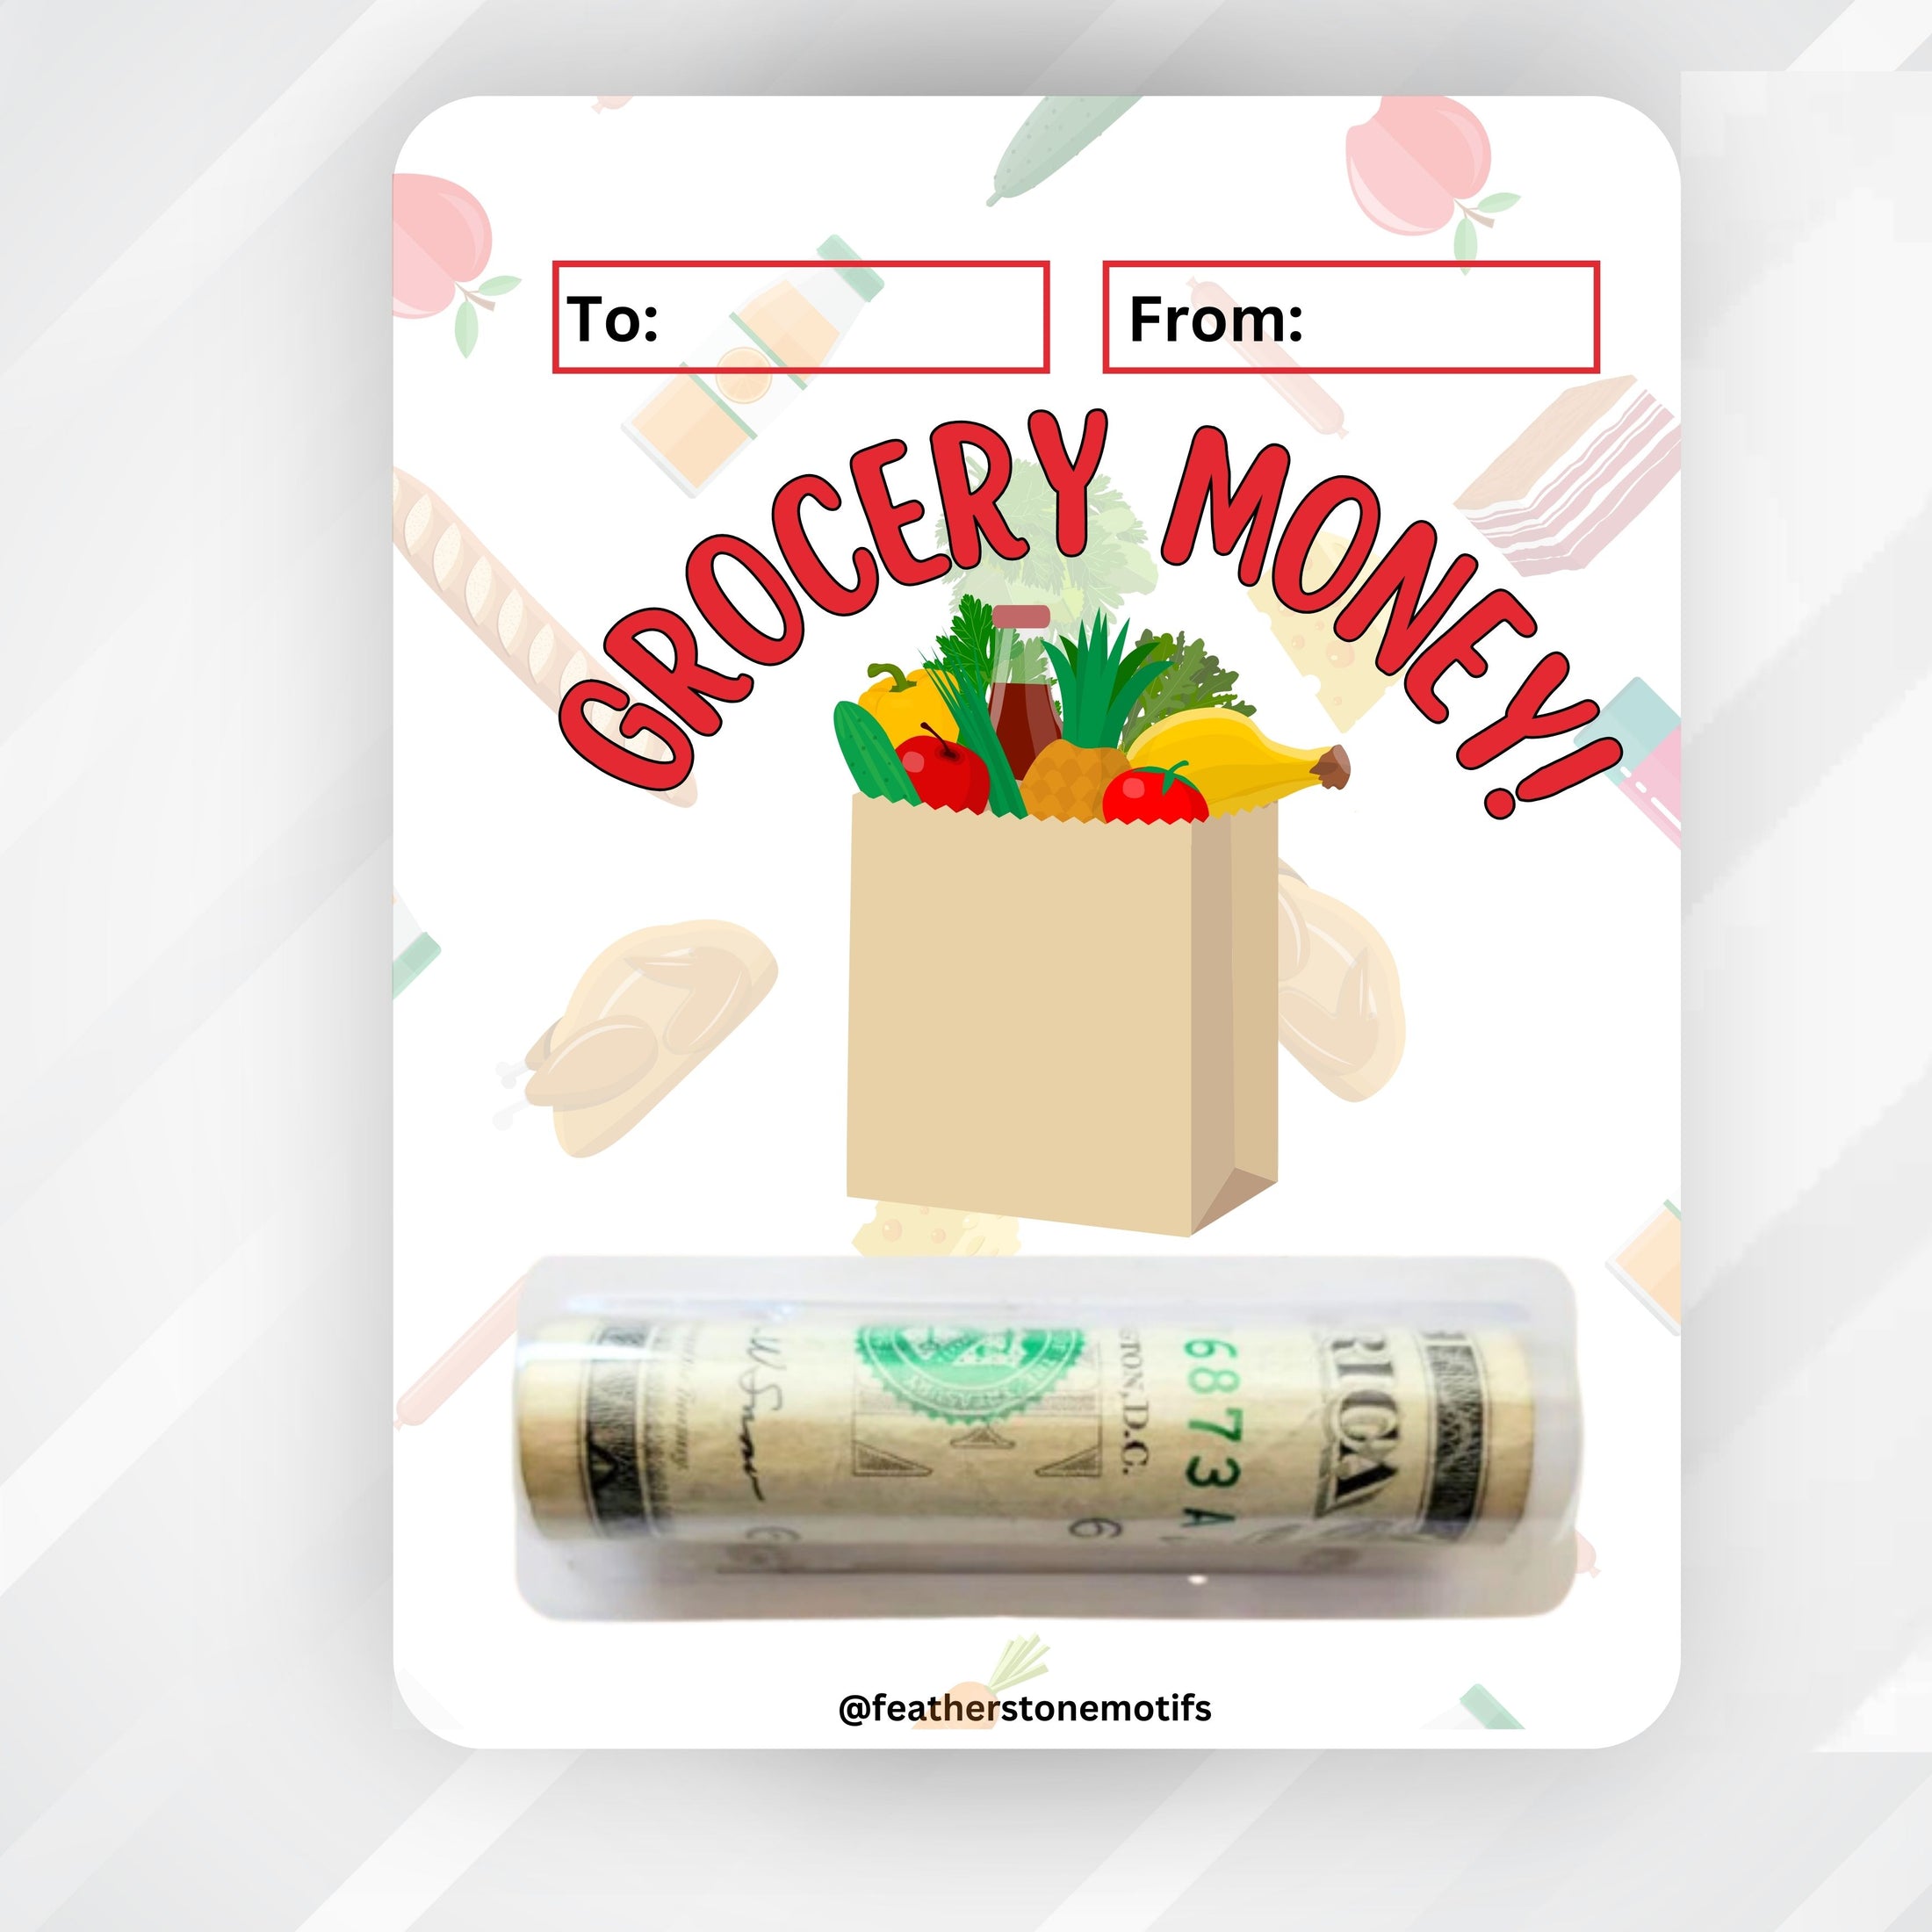 This image shows the money tube attached to the Grocery Money card.